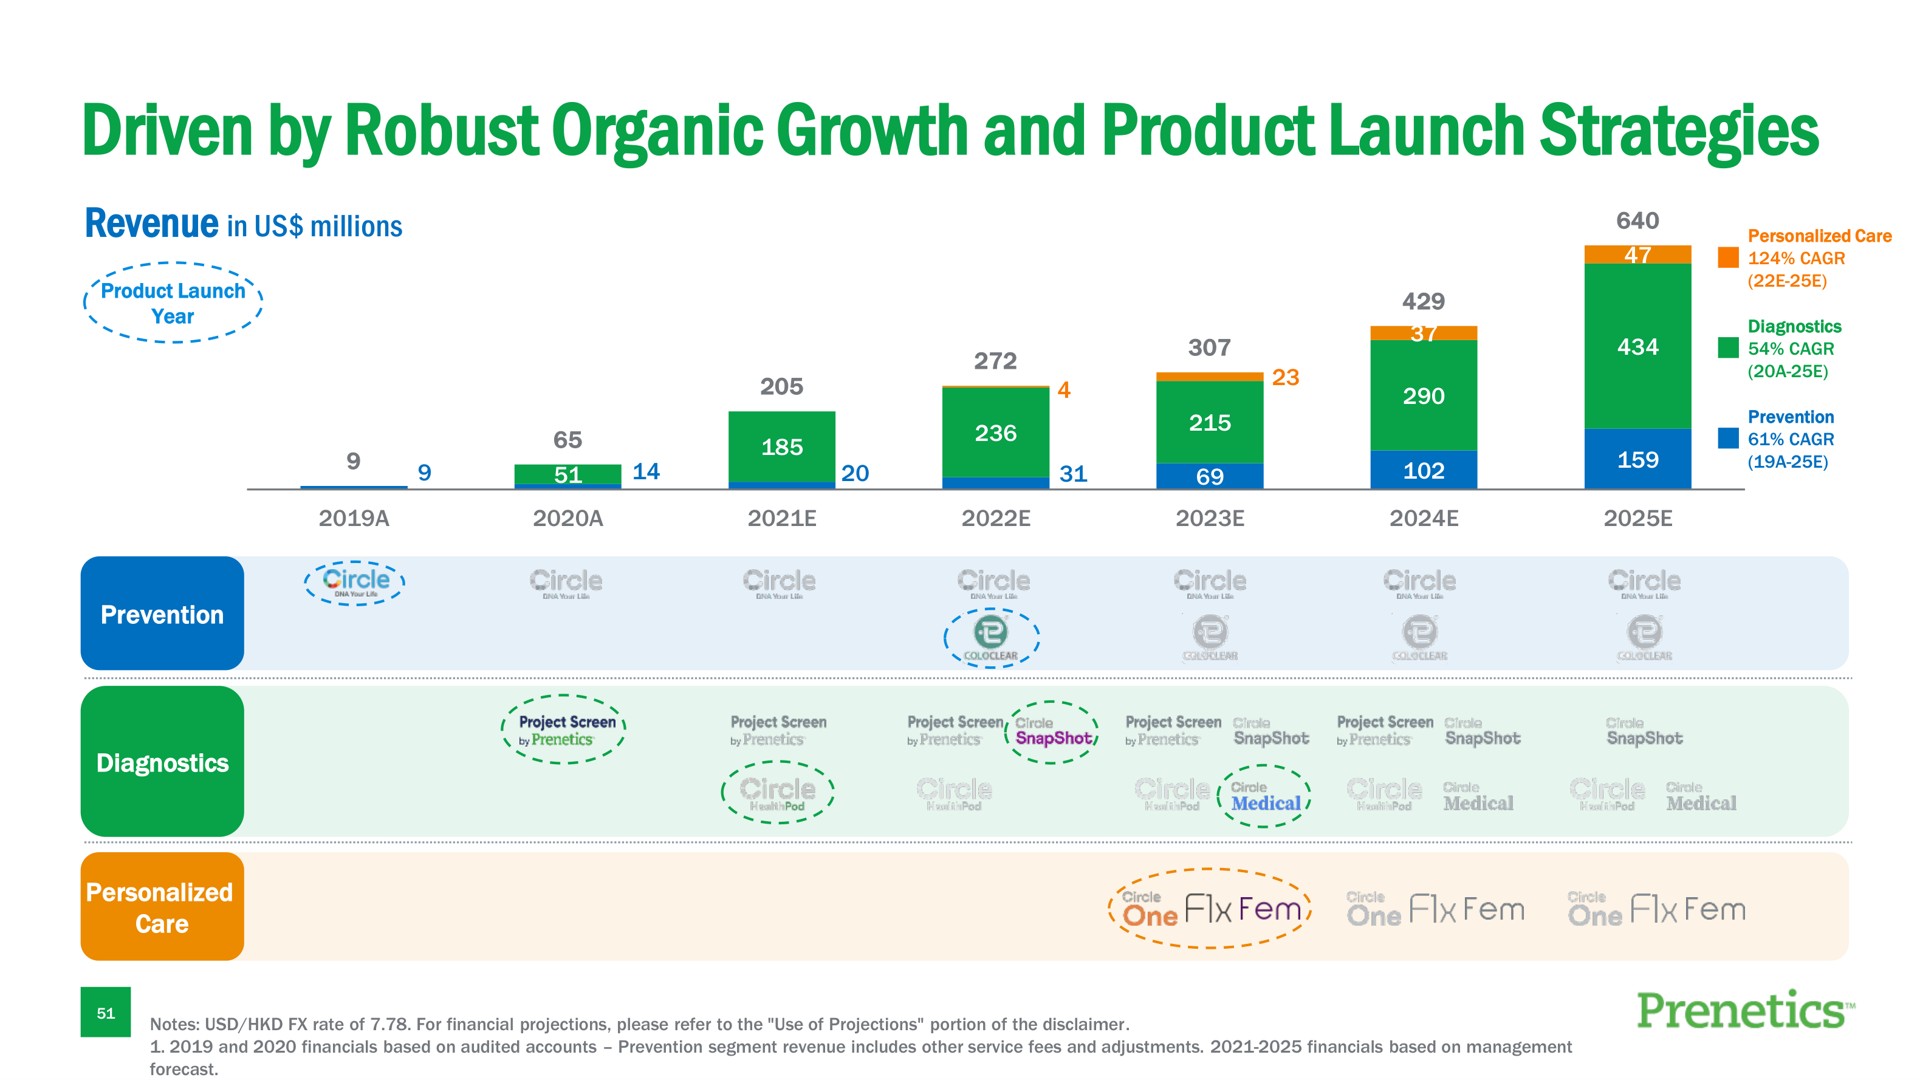 driven by robust organic growth and product launch strategies | Prenetics